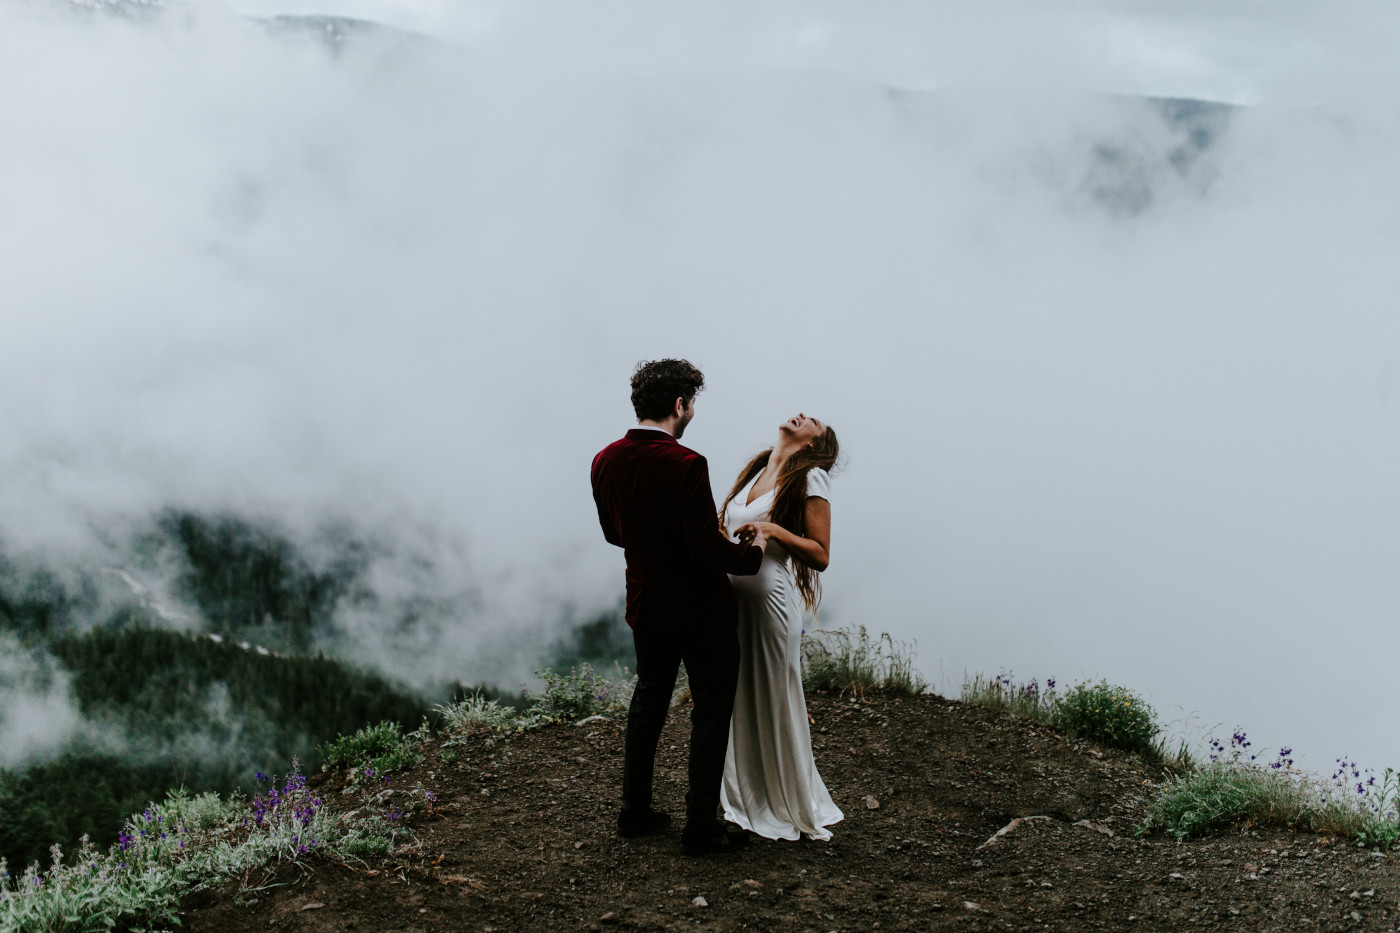 Murray makes Katelyn laugh. Elopement wedding photography at Mount Hood by Sienna Plus Josh.